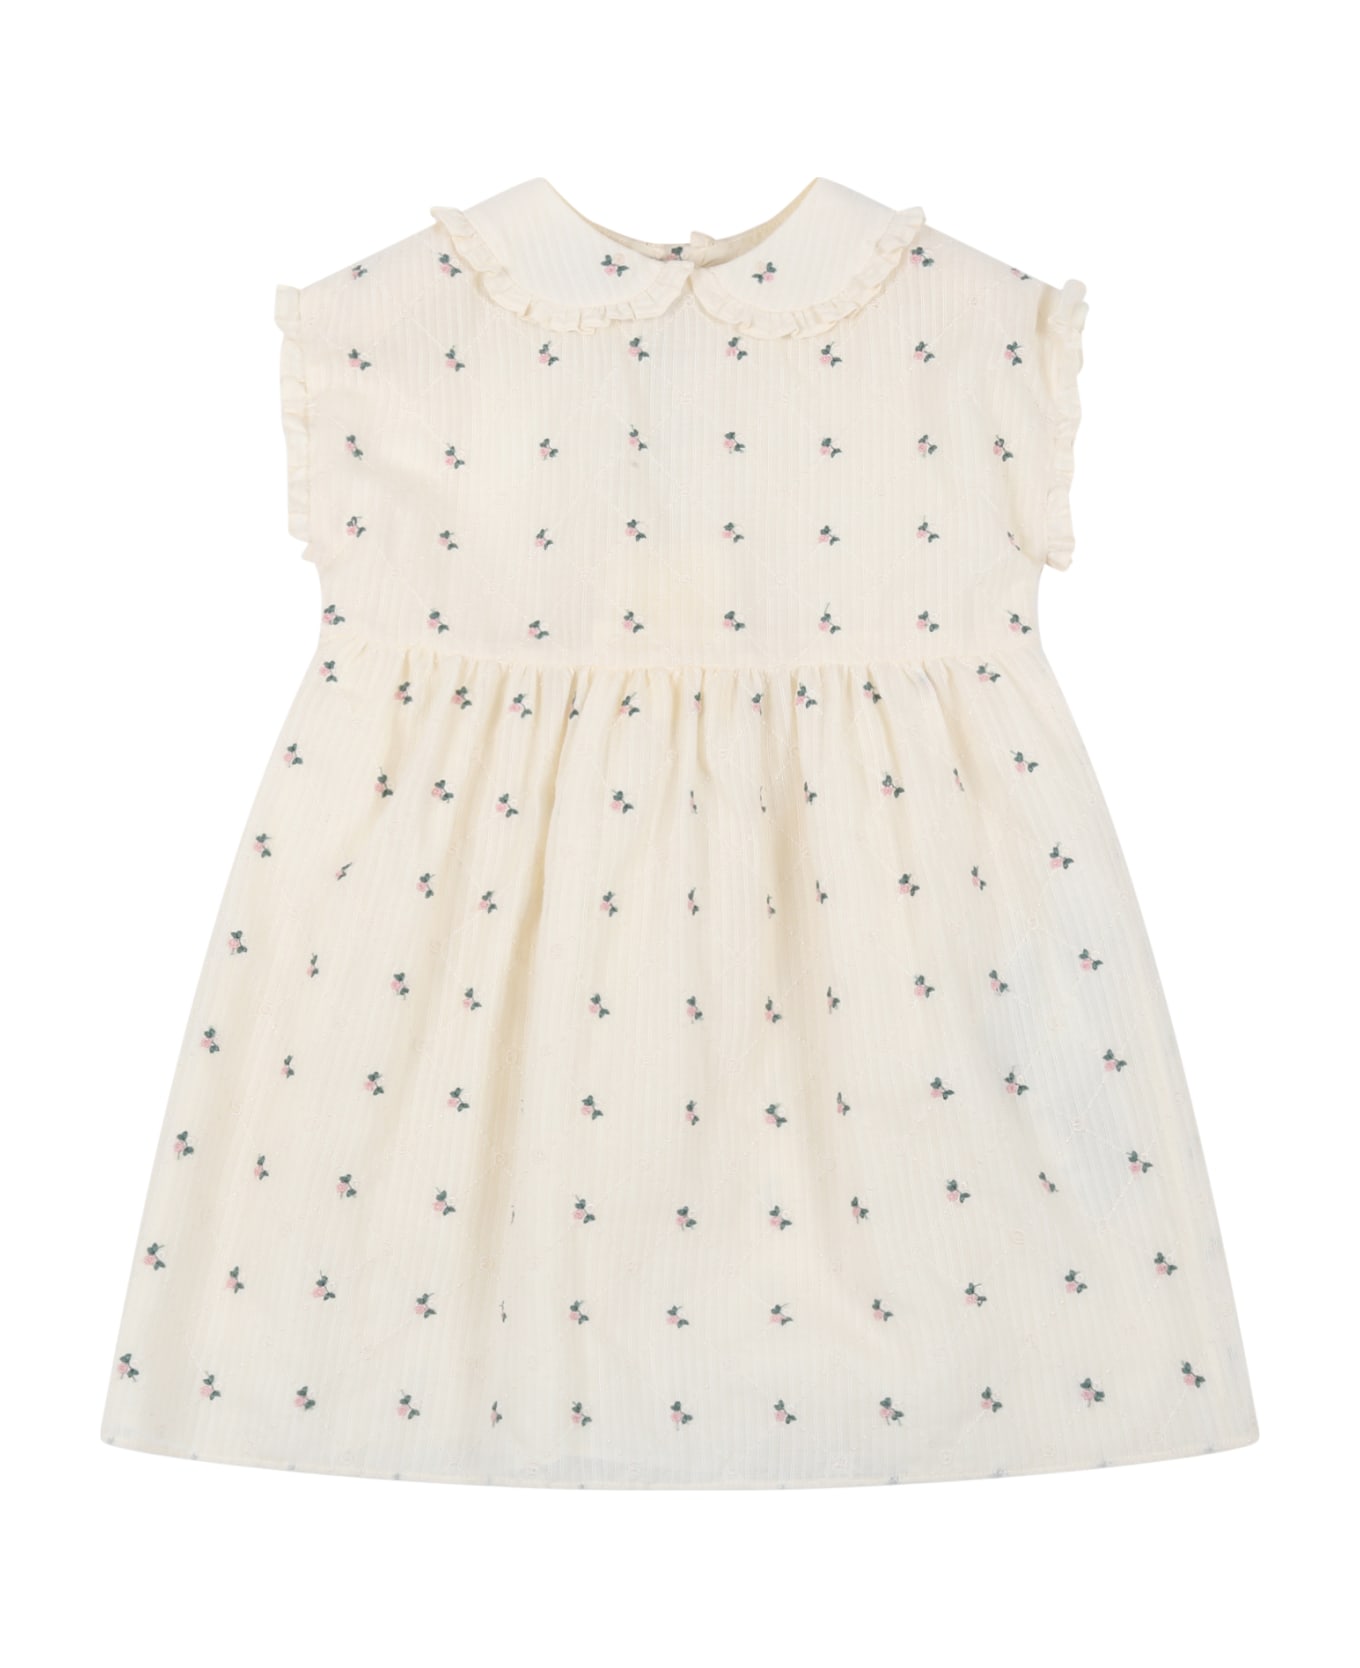 Gucci Ivory Dress For Baby Girl With Flowers - White